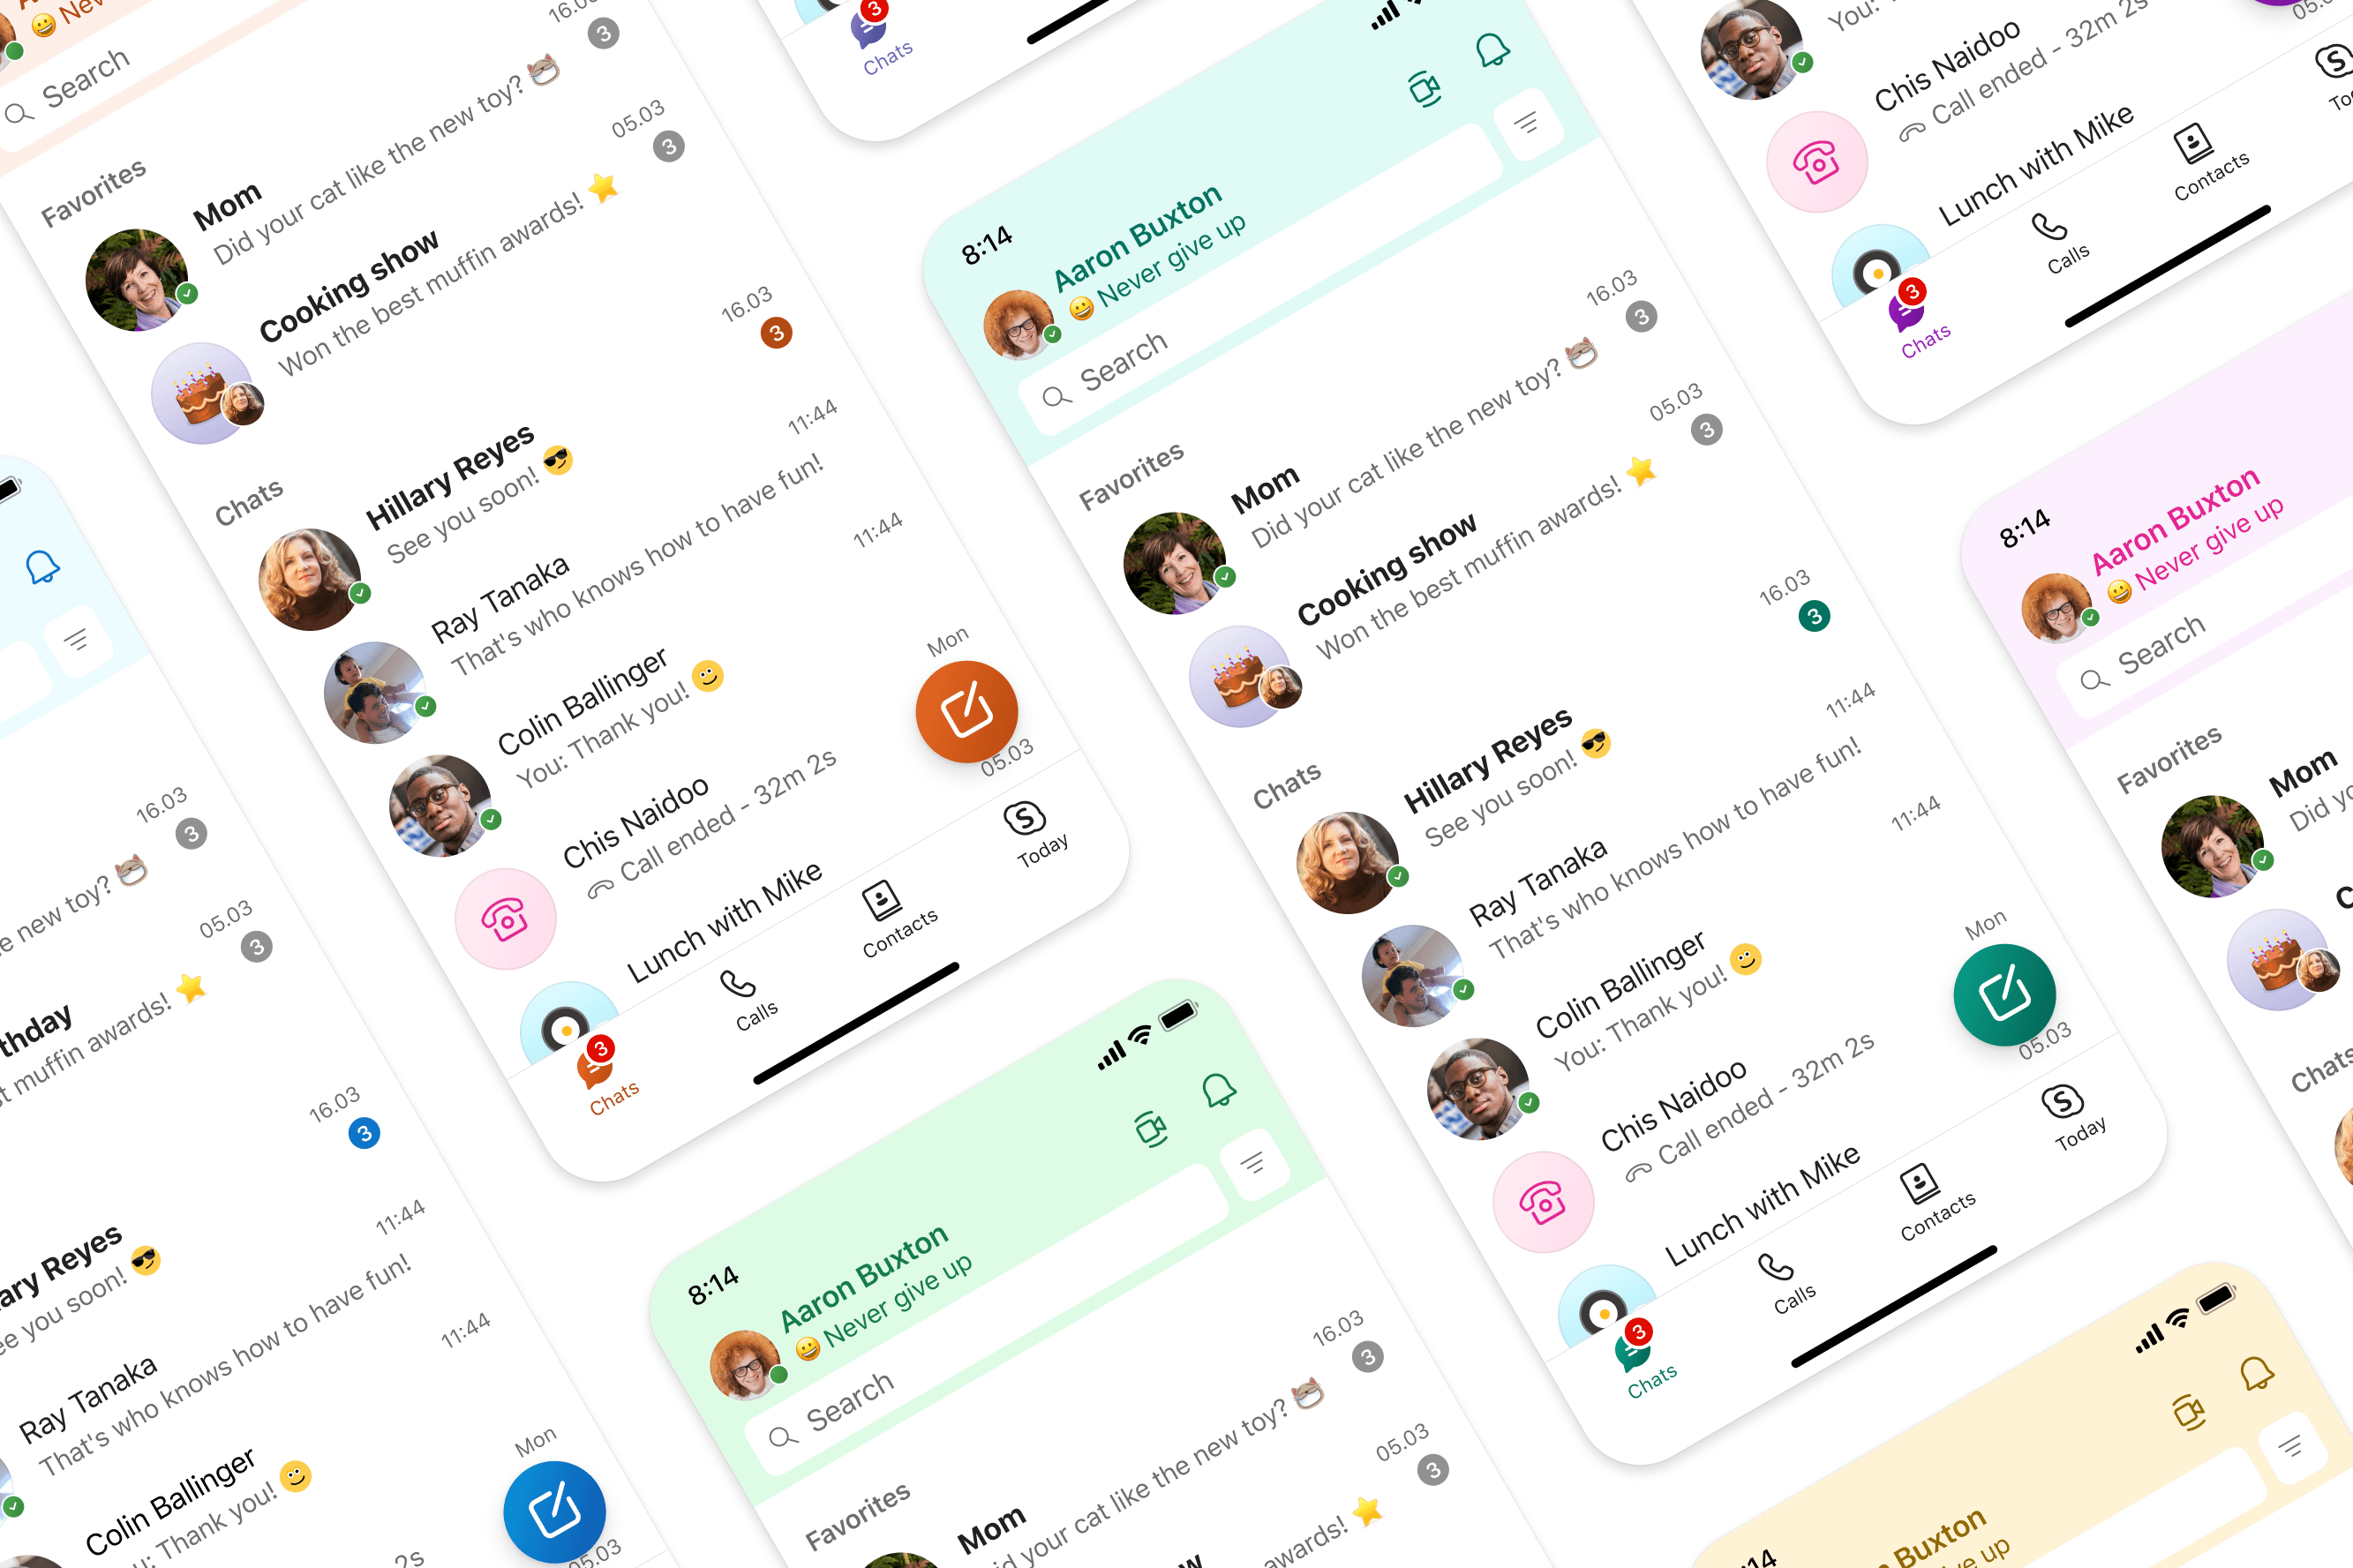 Various screenshots of the Skype mobile app showing more colorful themes, including colored headers